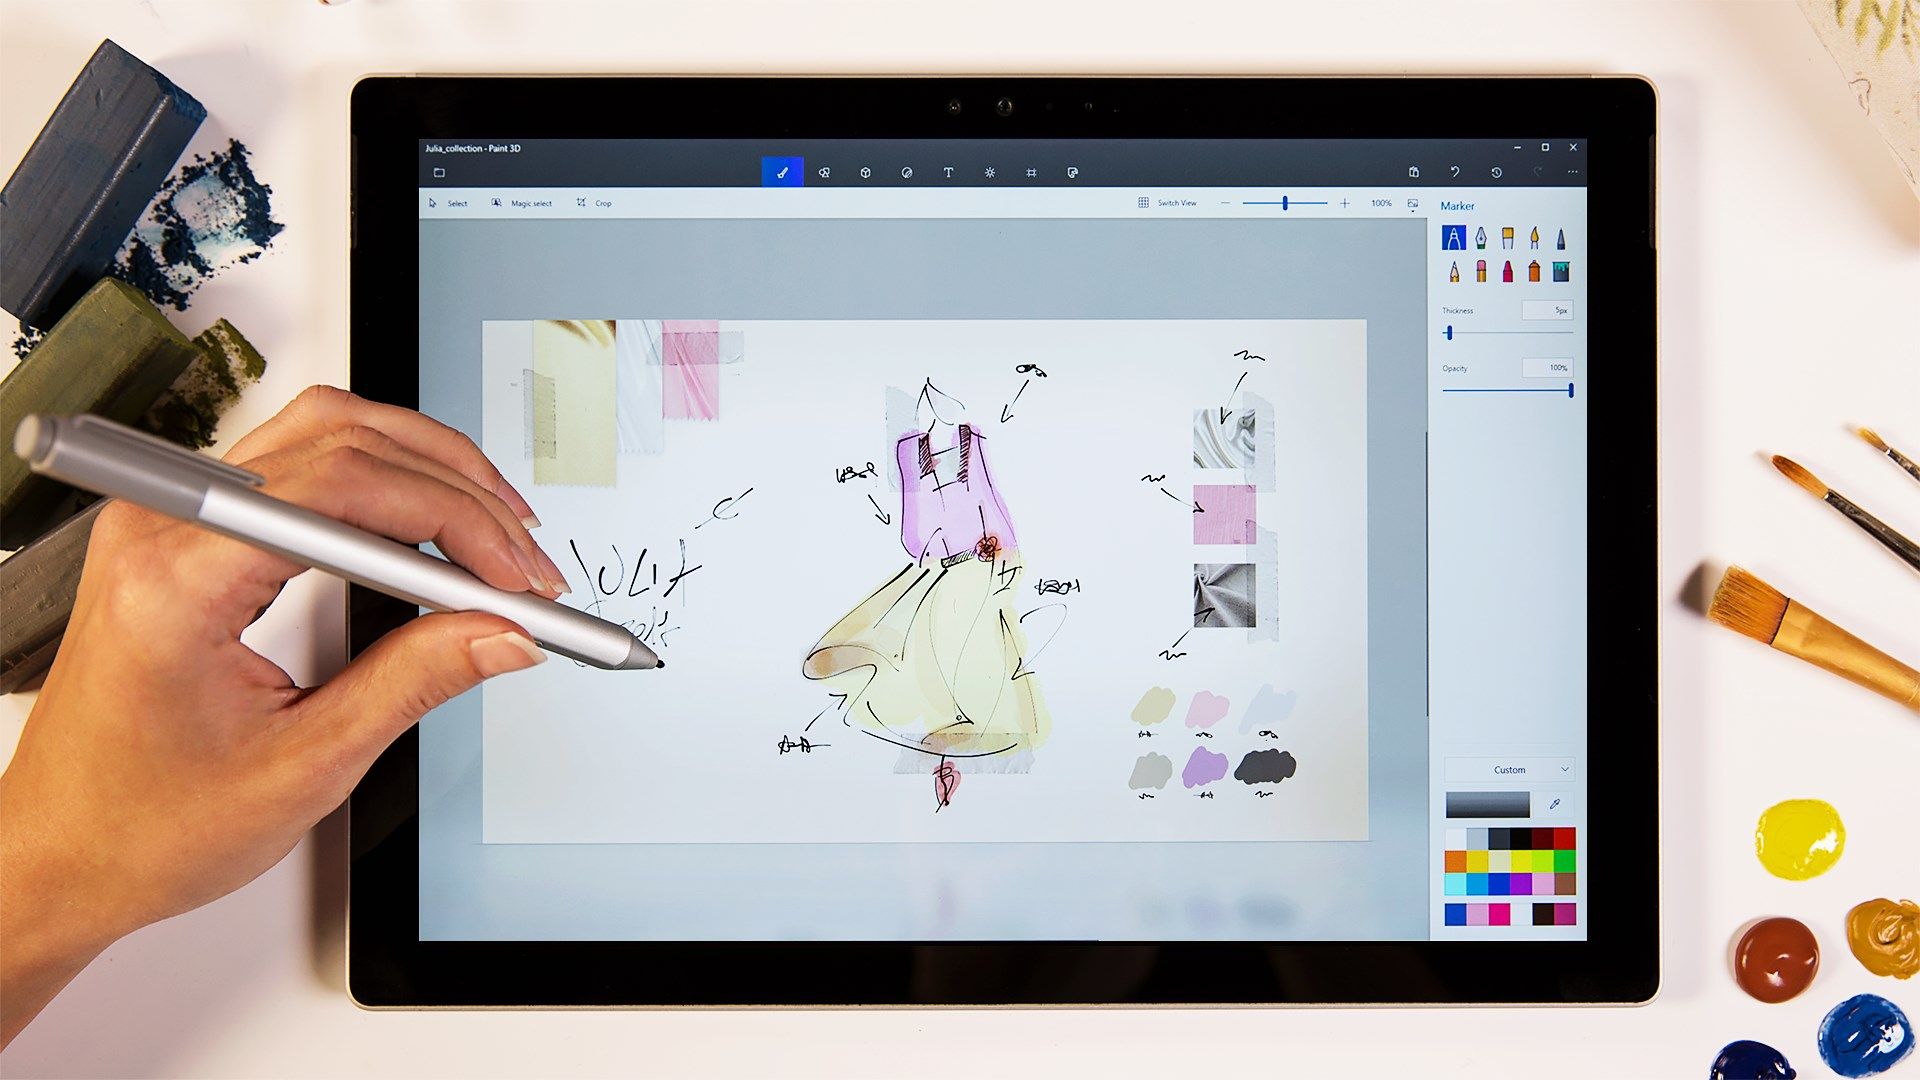 Sketch your ideas and make notes with tools like the pen and marker.